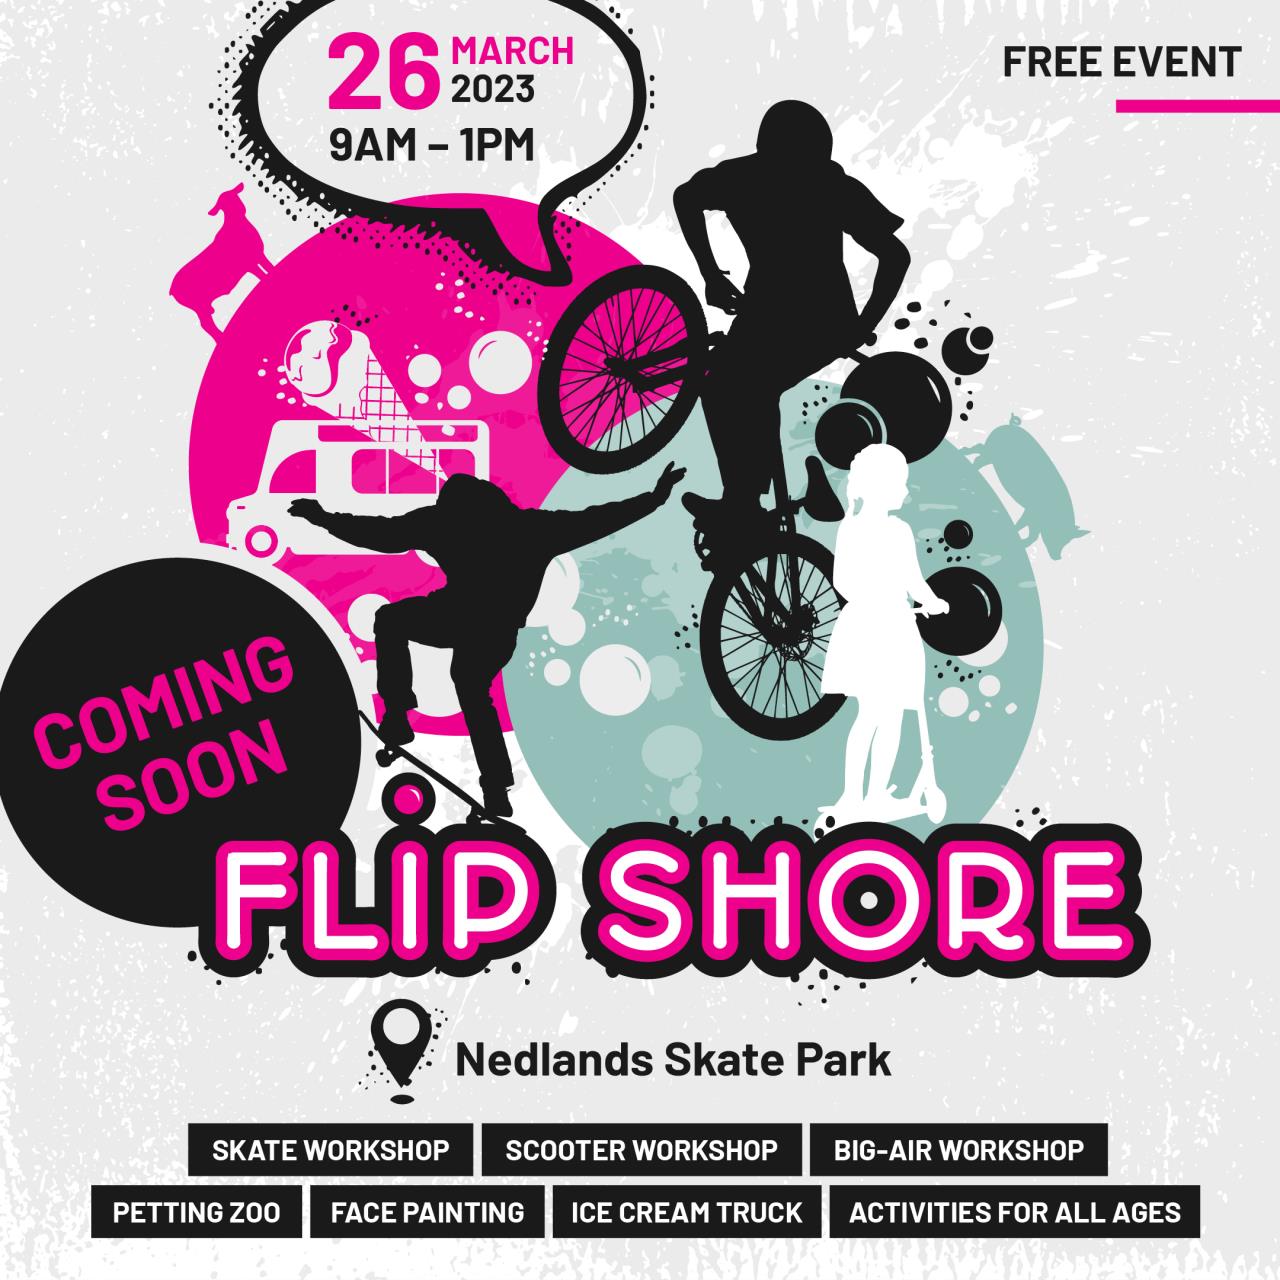 Flip-Shore! Nedlands skateboard, scooter and BMX coaching sessions